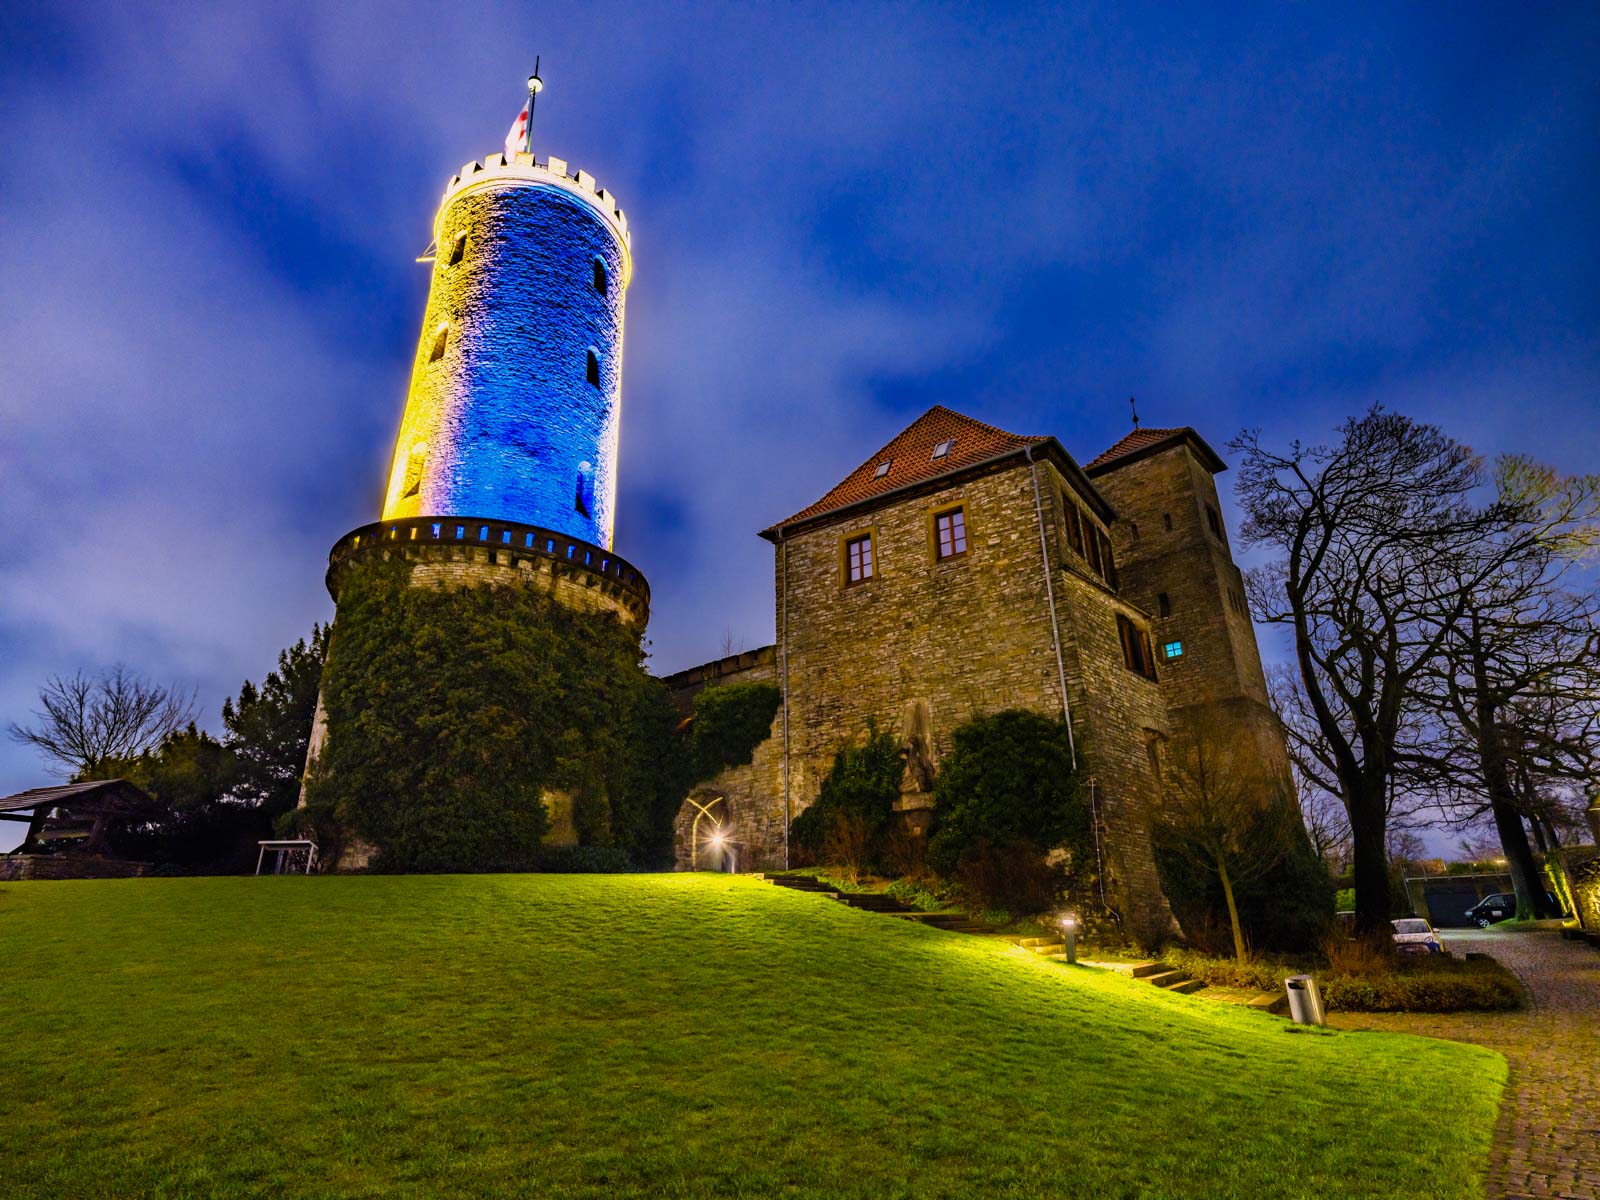 Sparrenburg castle in the evening of February 24, 2022 (Bielefeld, Germany).